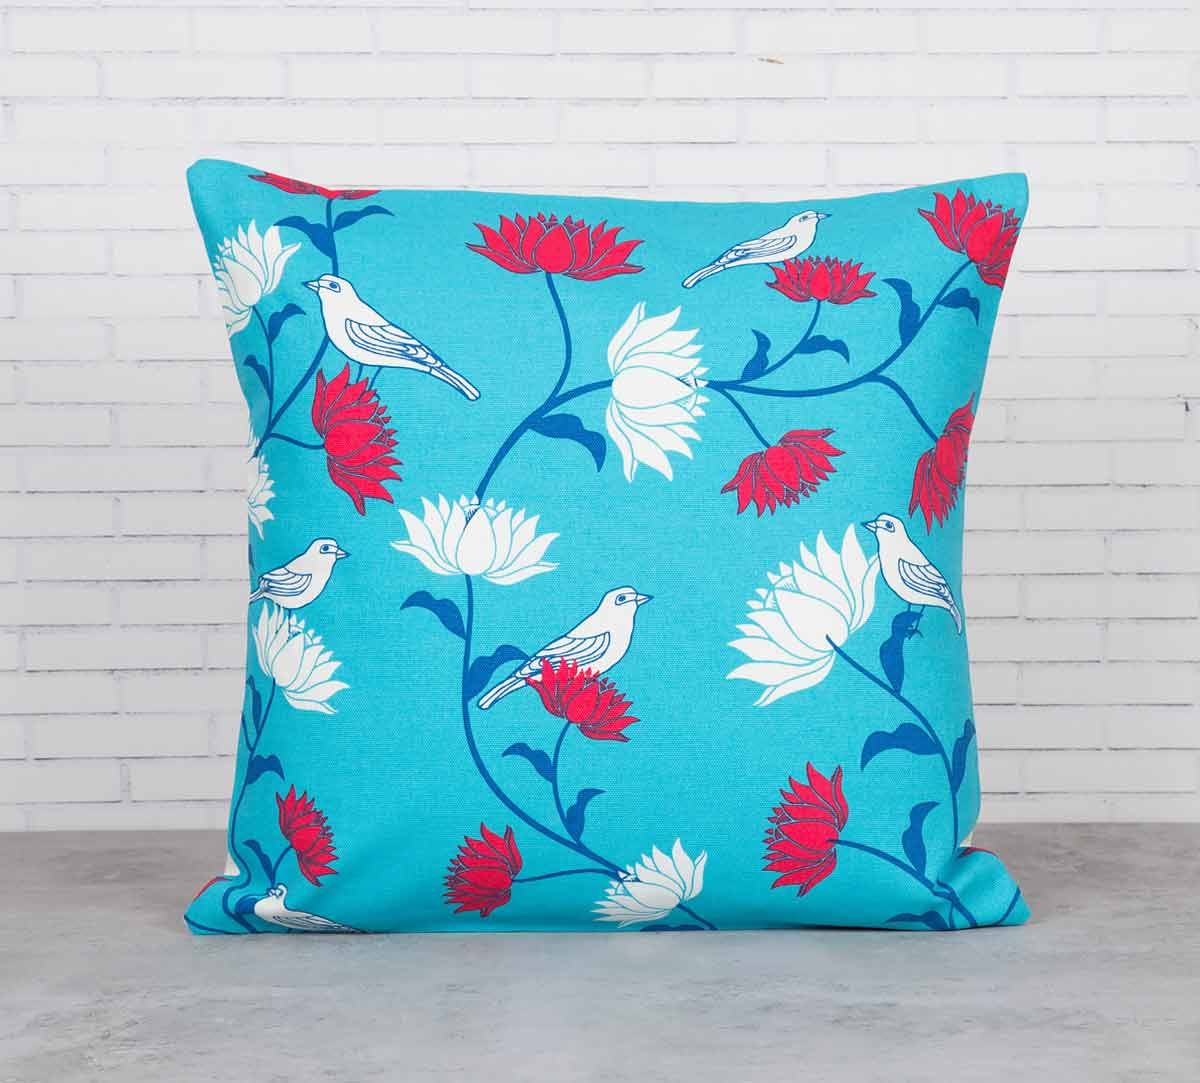 India Circus Yield of Divinity Blue Cotton Cushion Cover